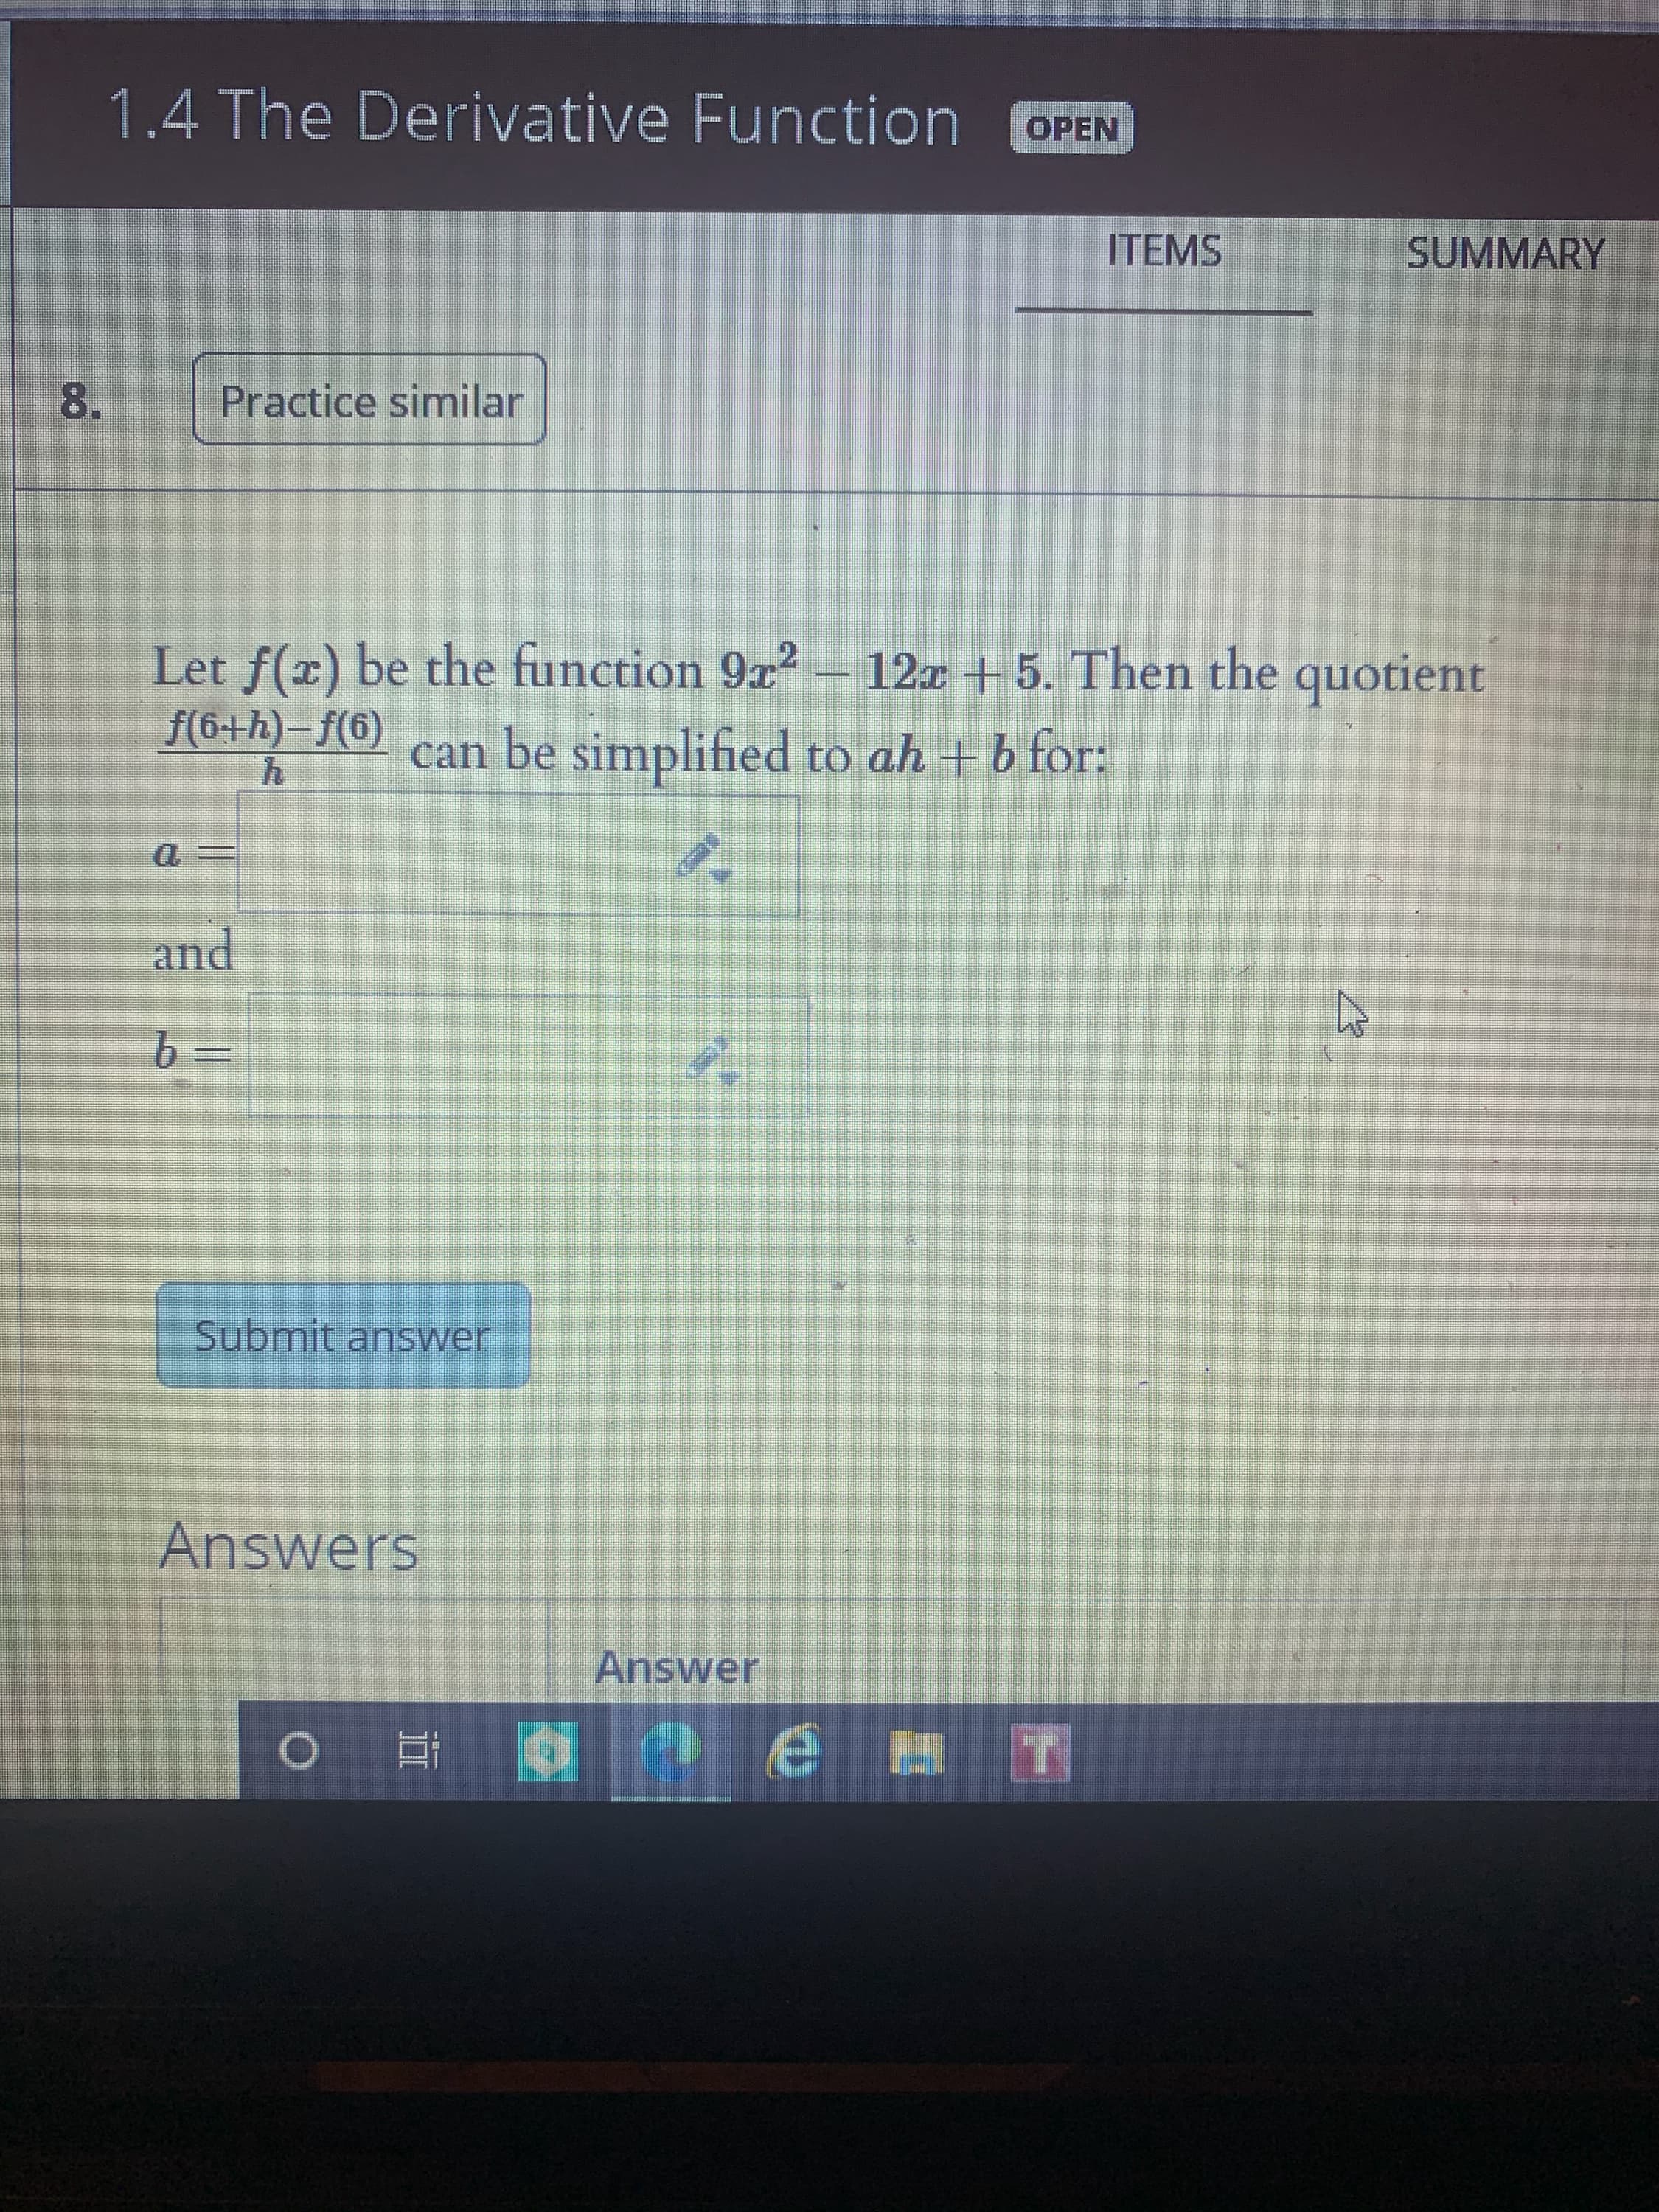 Let f(x) be the function 9a? - 12x +5. Then the quotient
f(6++h)–f(6)
can be simplified to ah + b for:
and
b =
